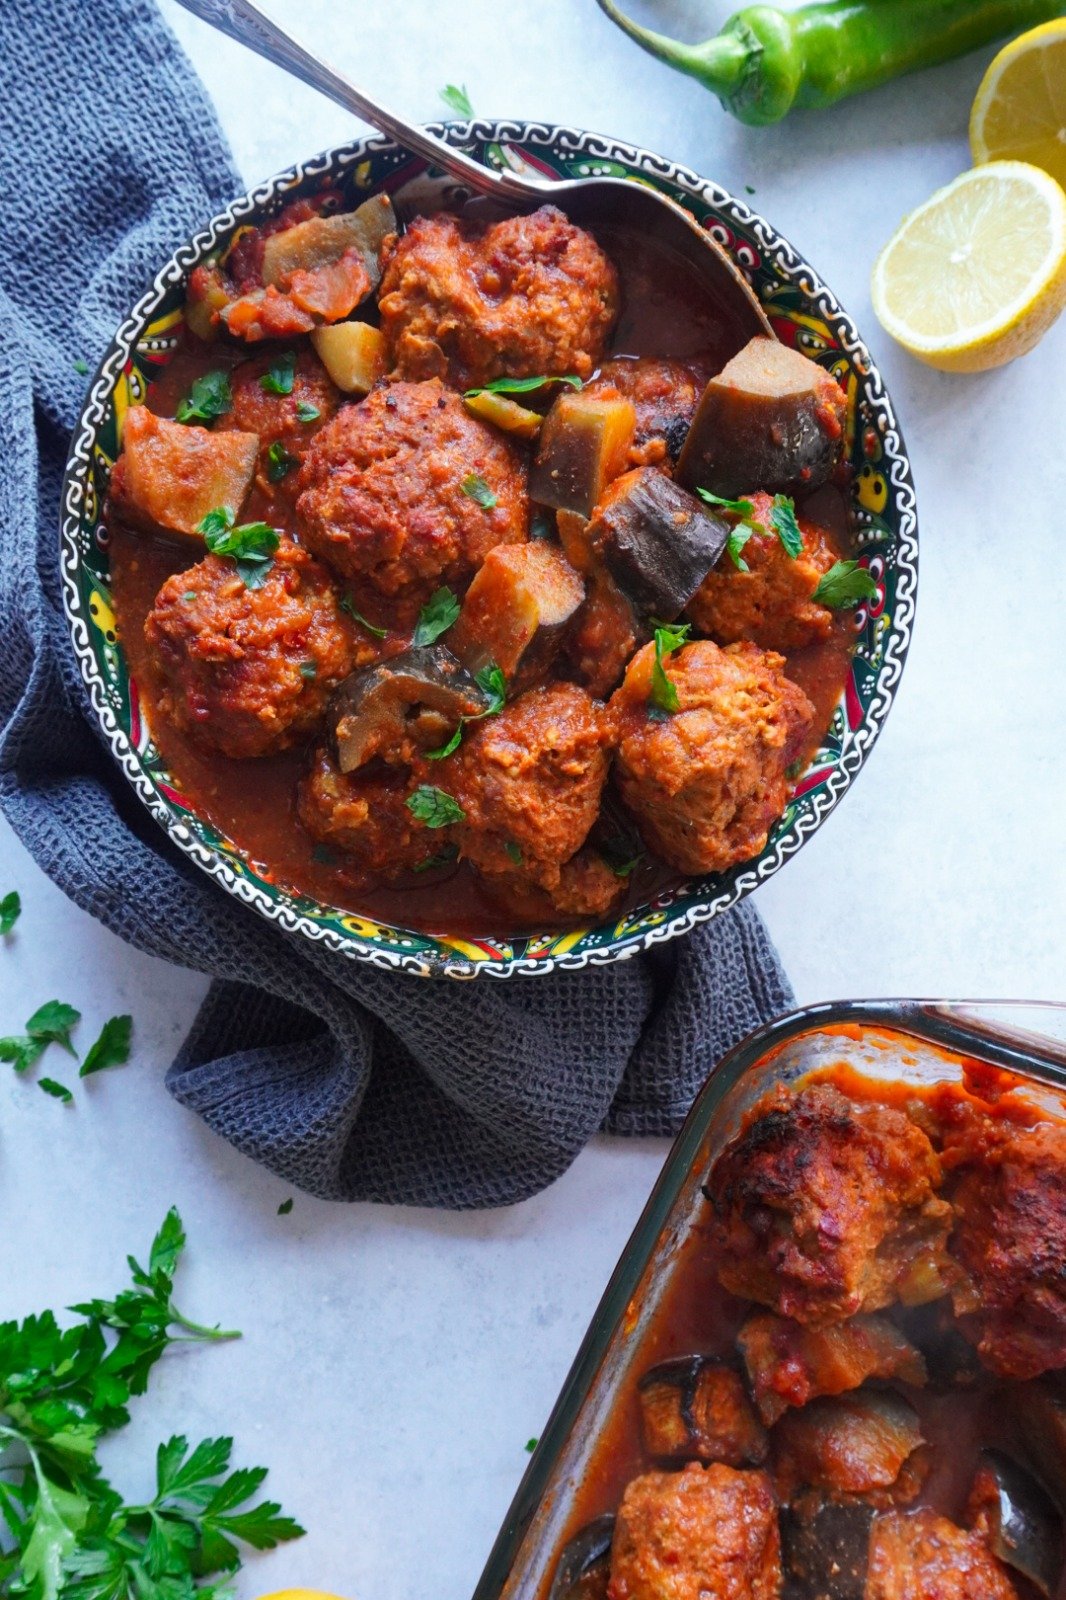 Baked Aubergine And Chicken Kofta or traditionally know as Tavuklu Patlican Kebab is such a tasty recipe to enjoy.